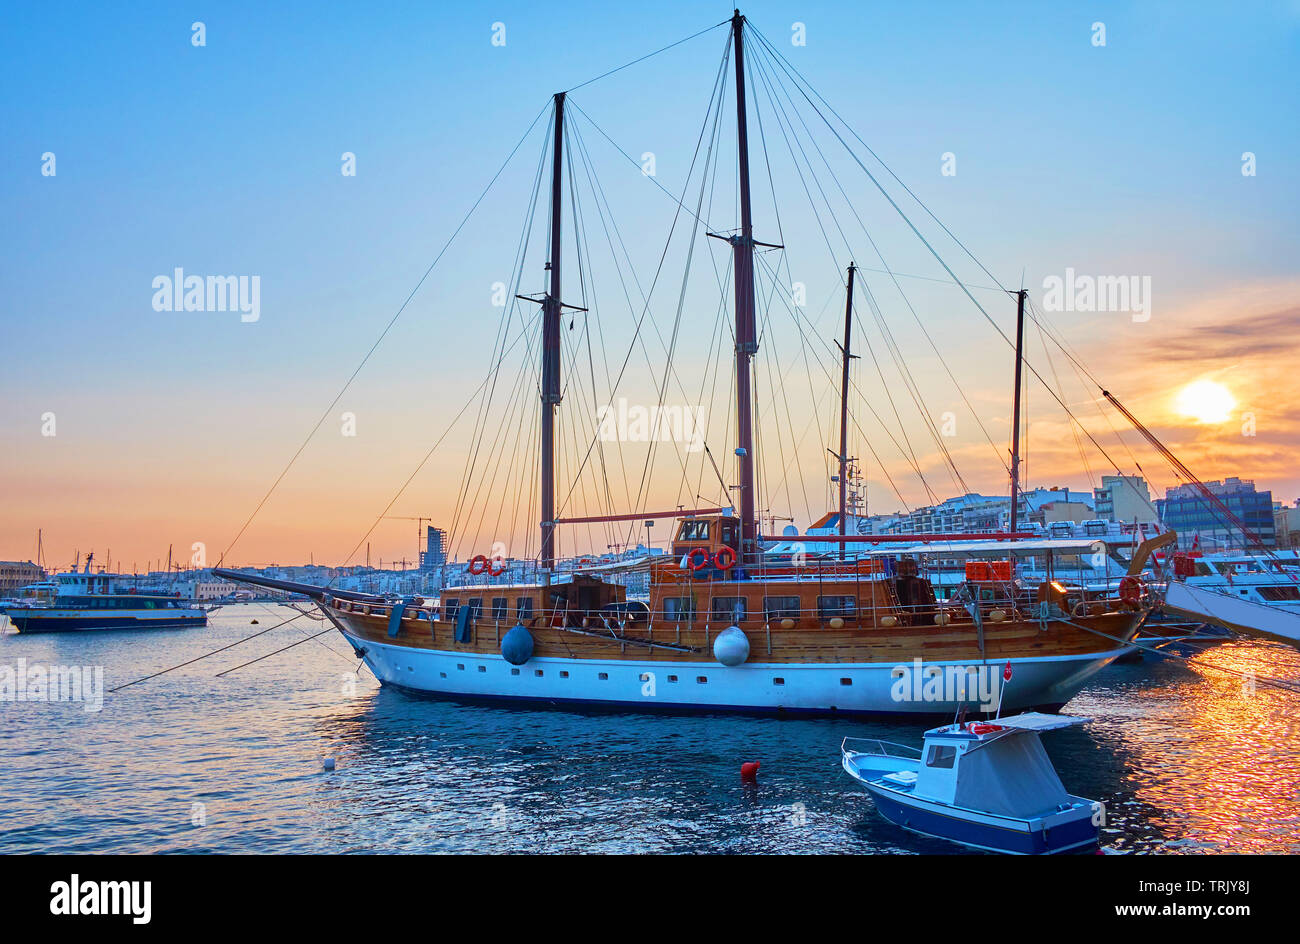 The seaside promenade is the best place to watch the sunset in Sliema, local sail yachts and ships look great in dimmed lights of evening sky, Malta Stock Photo